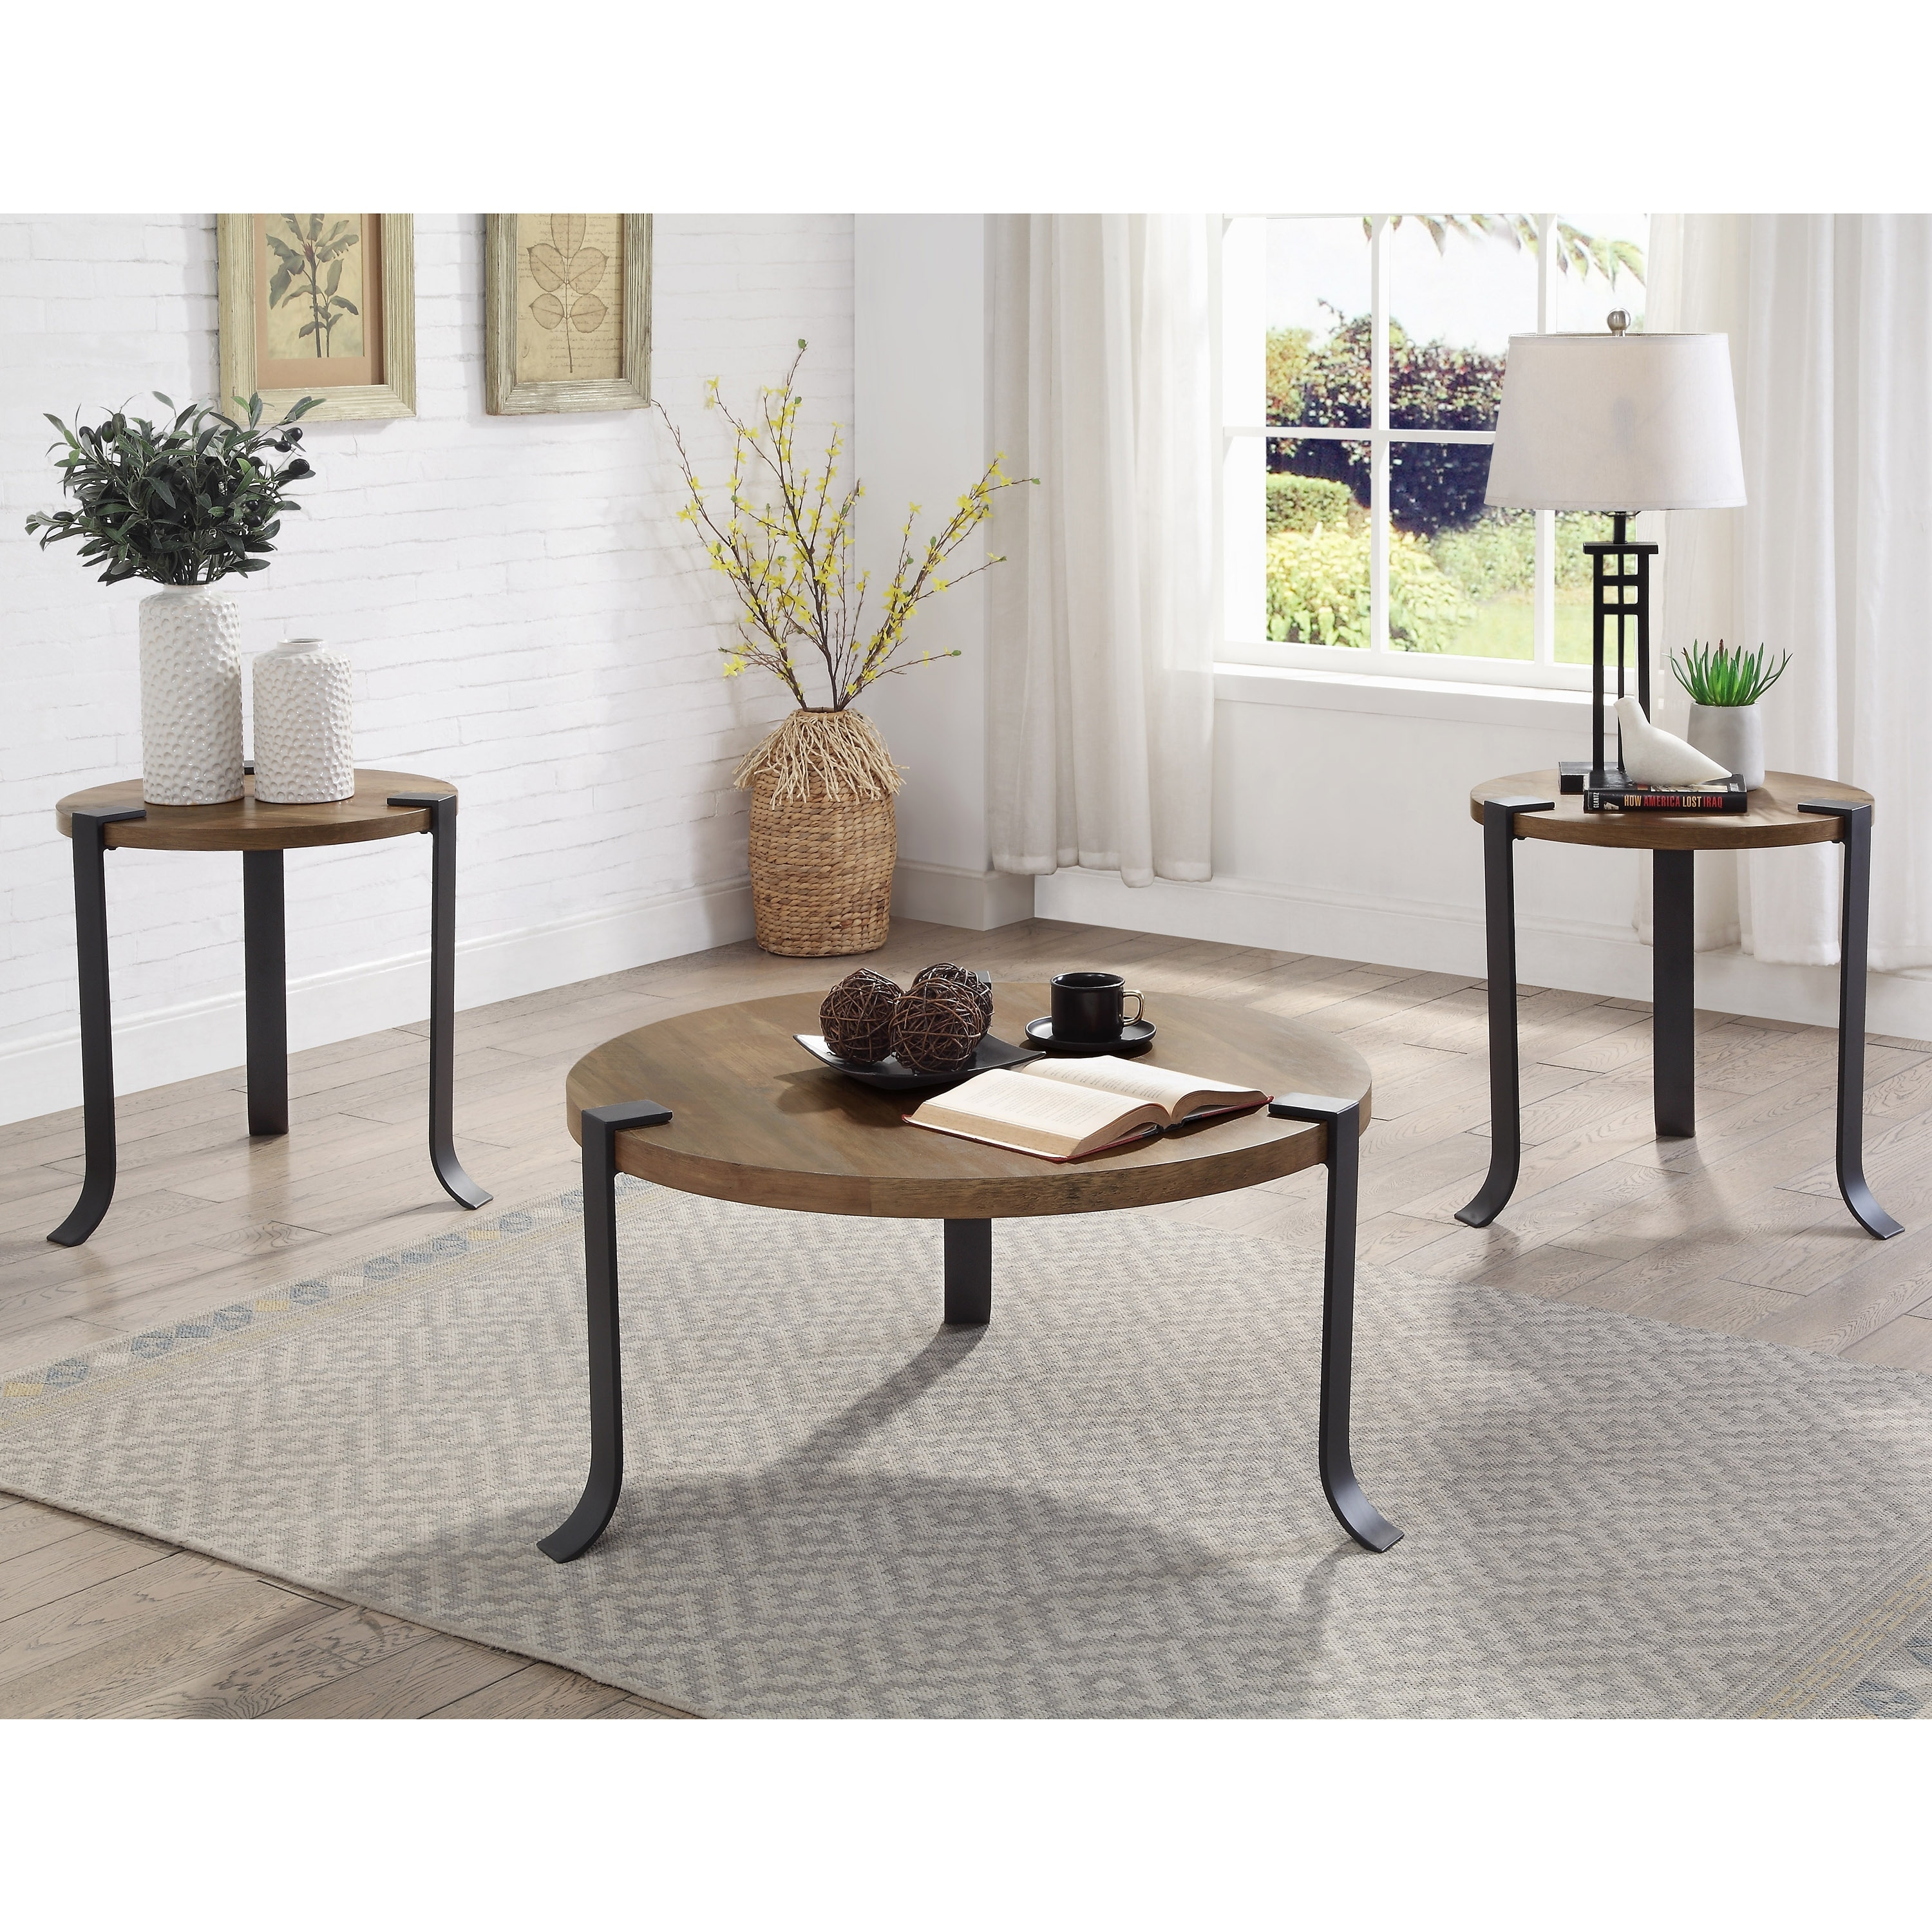 Furniture Of America Moril 3 Piece Coffee Table And End Tables Set On Sale Overstock 32519084